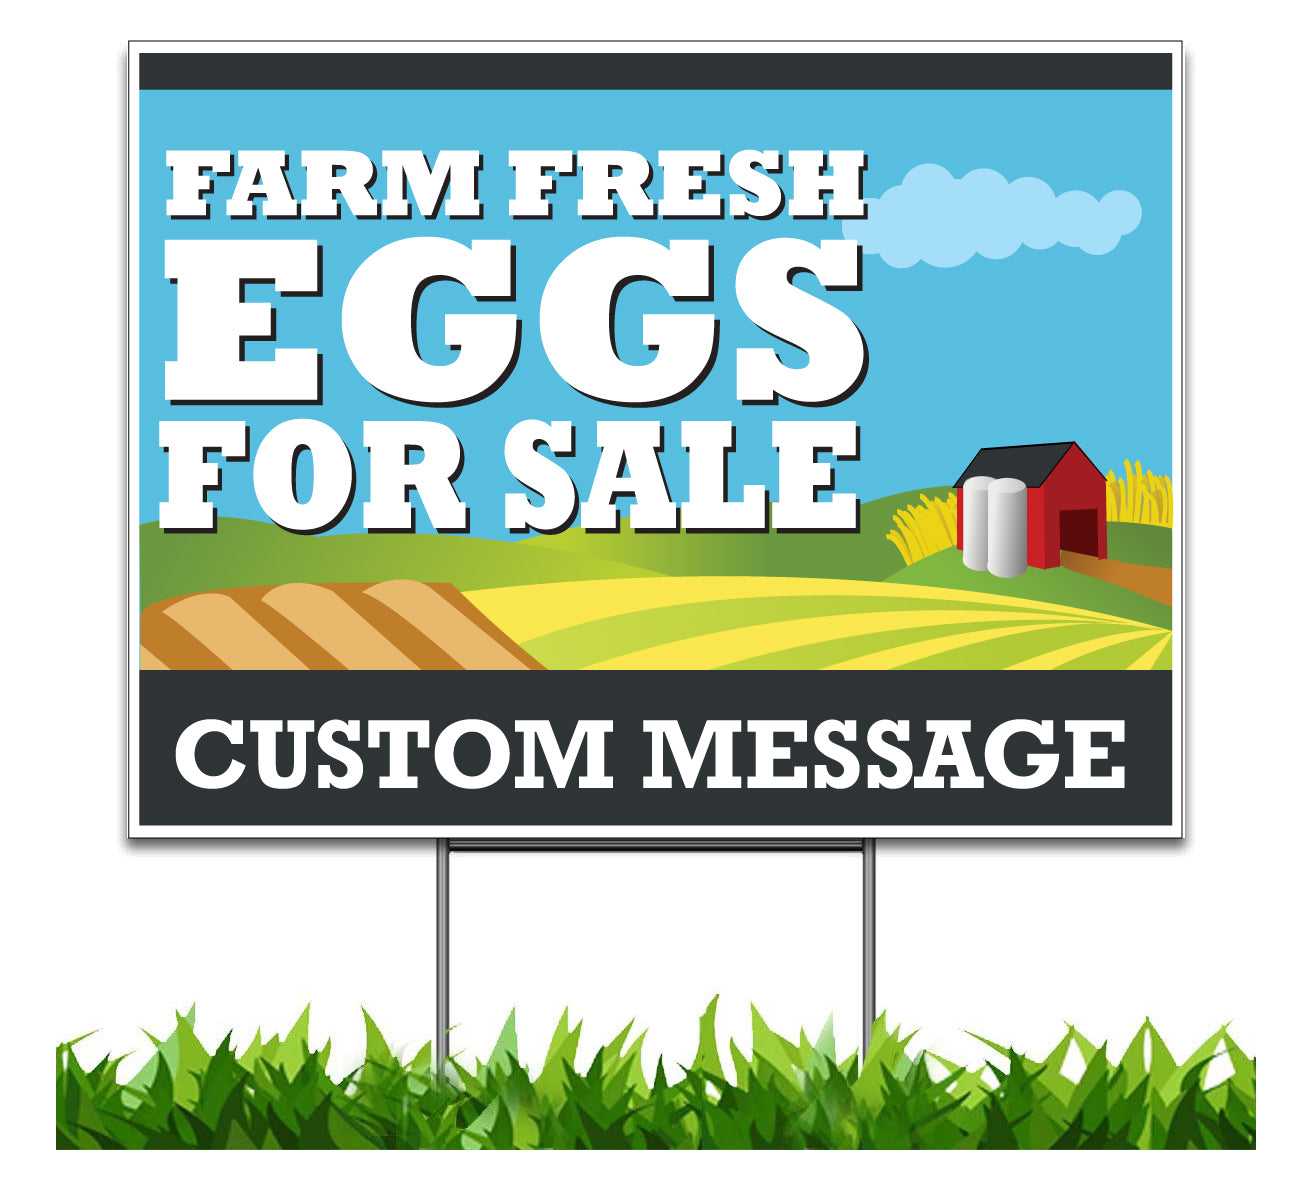 Custom Farm Fresh Eggs For Sale Yard Sign 24 x 36-inch (Outdoor, Weatherproof Corrugated Plastic) Metal H-Stake Included v1